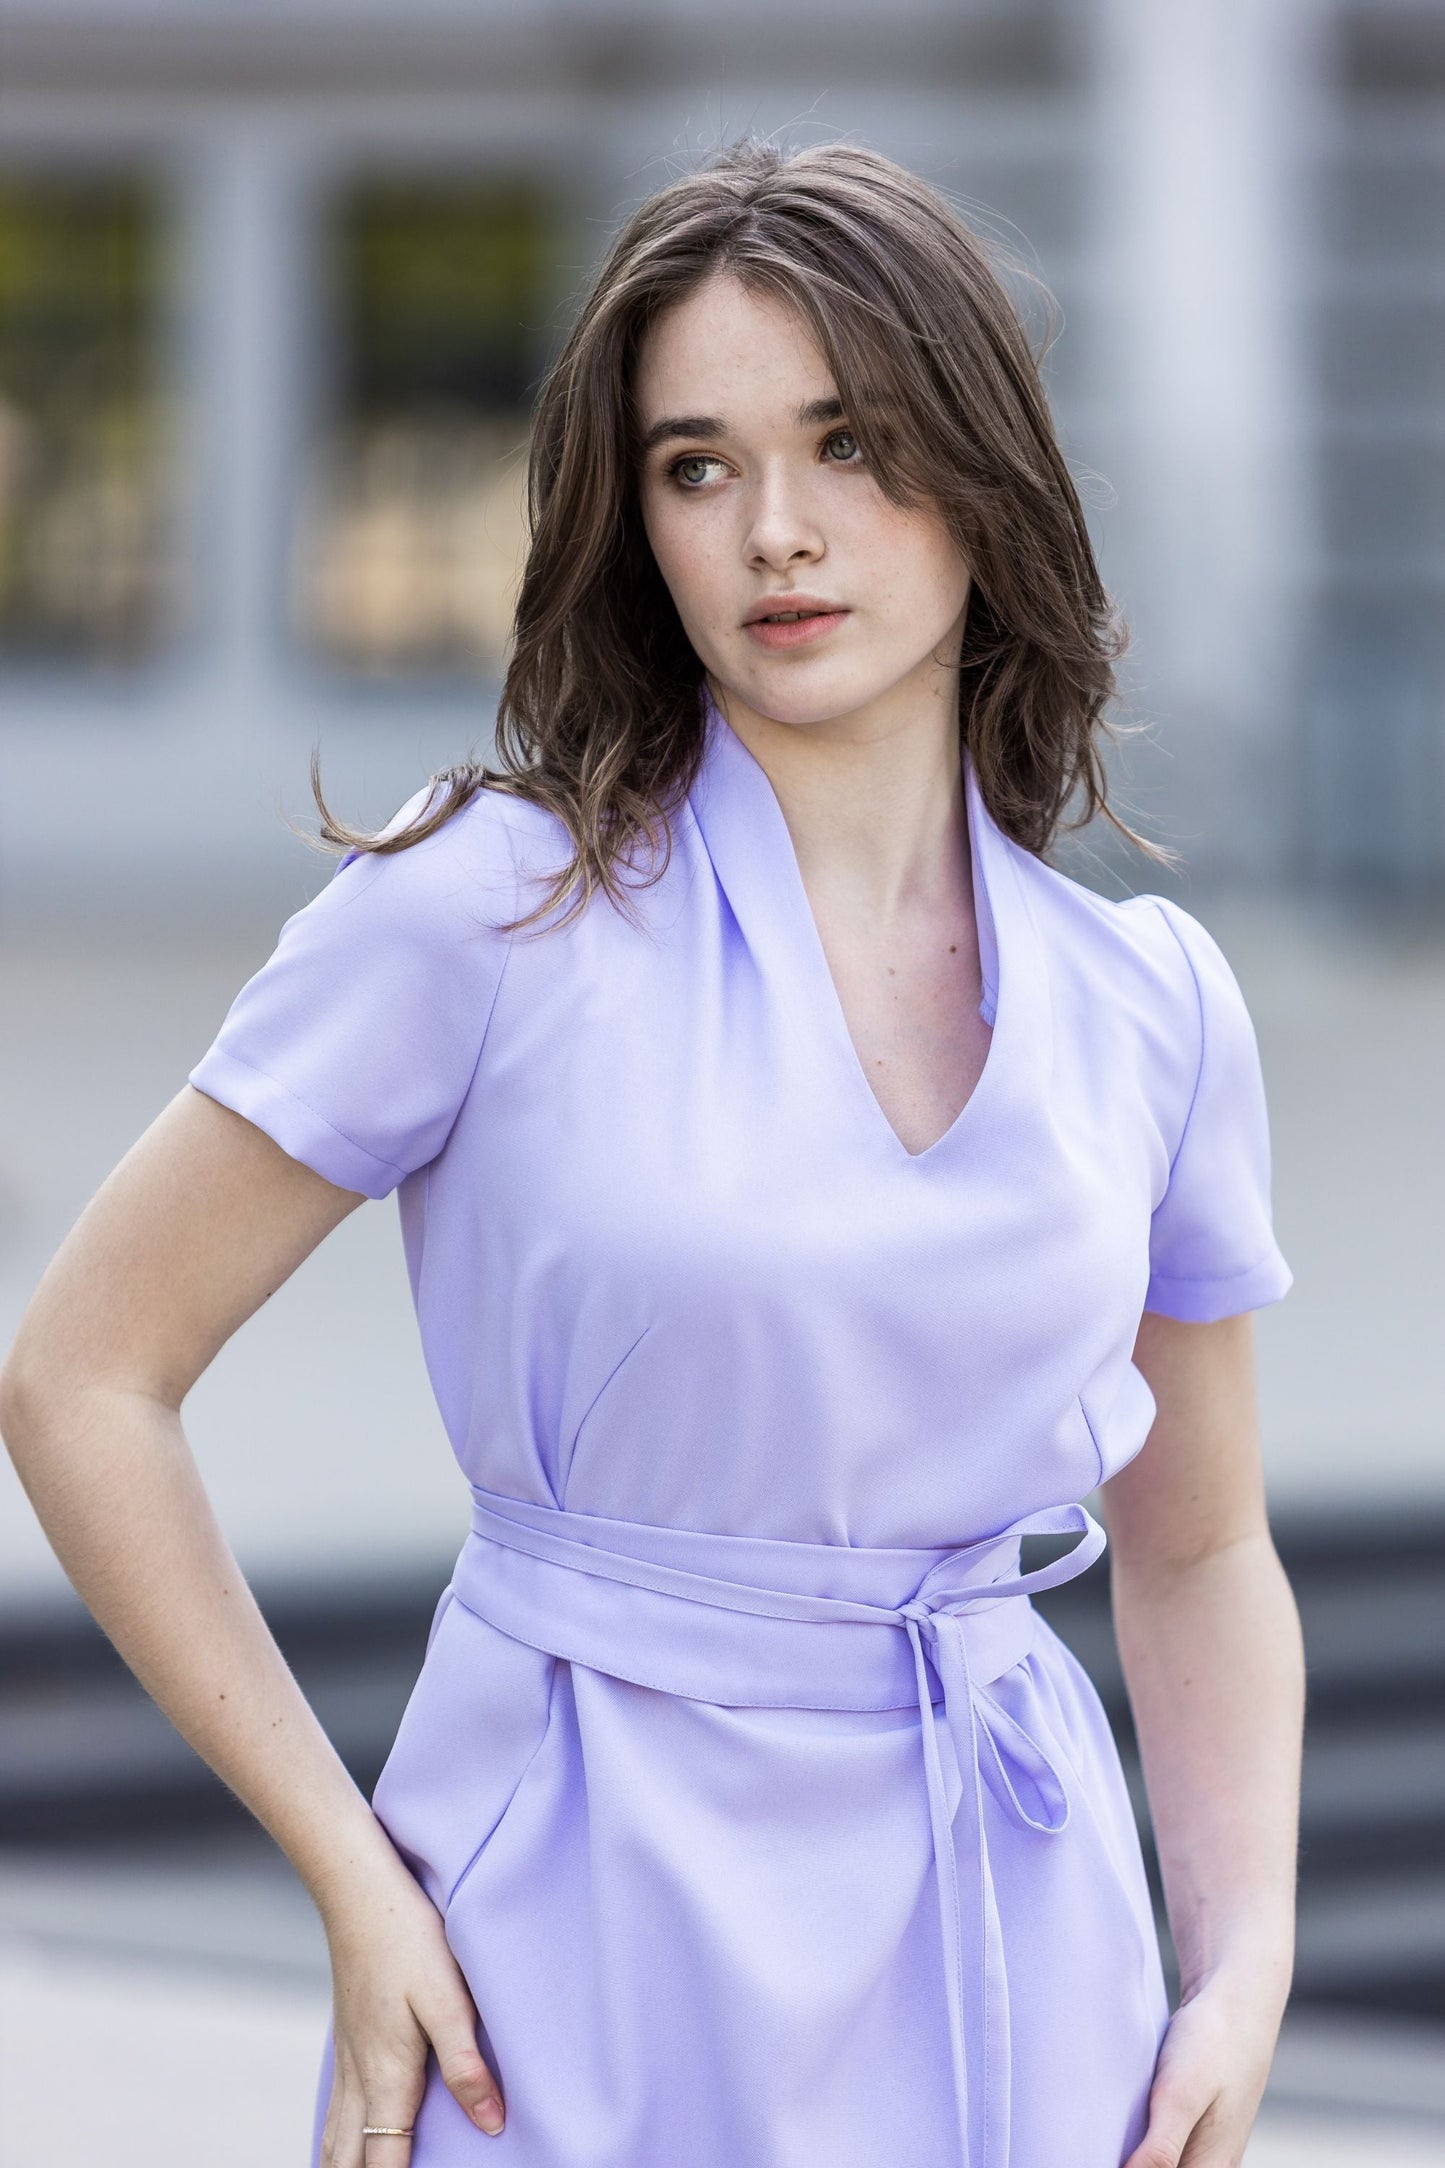 Lilac dress with side pockets and belt